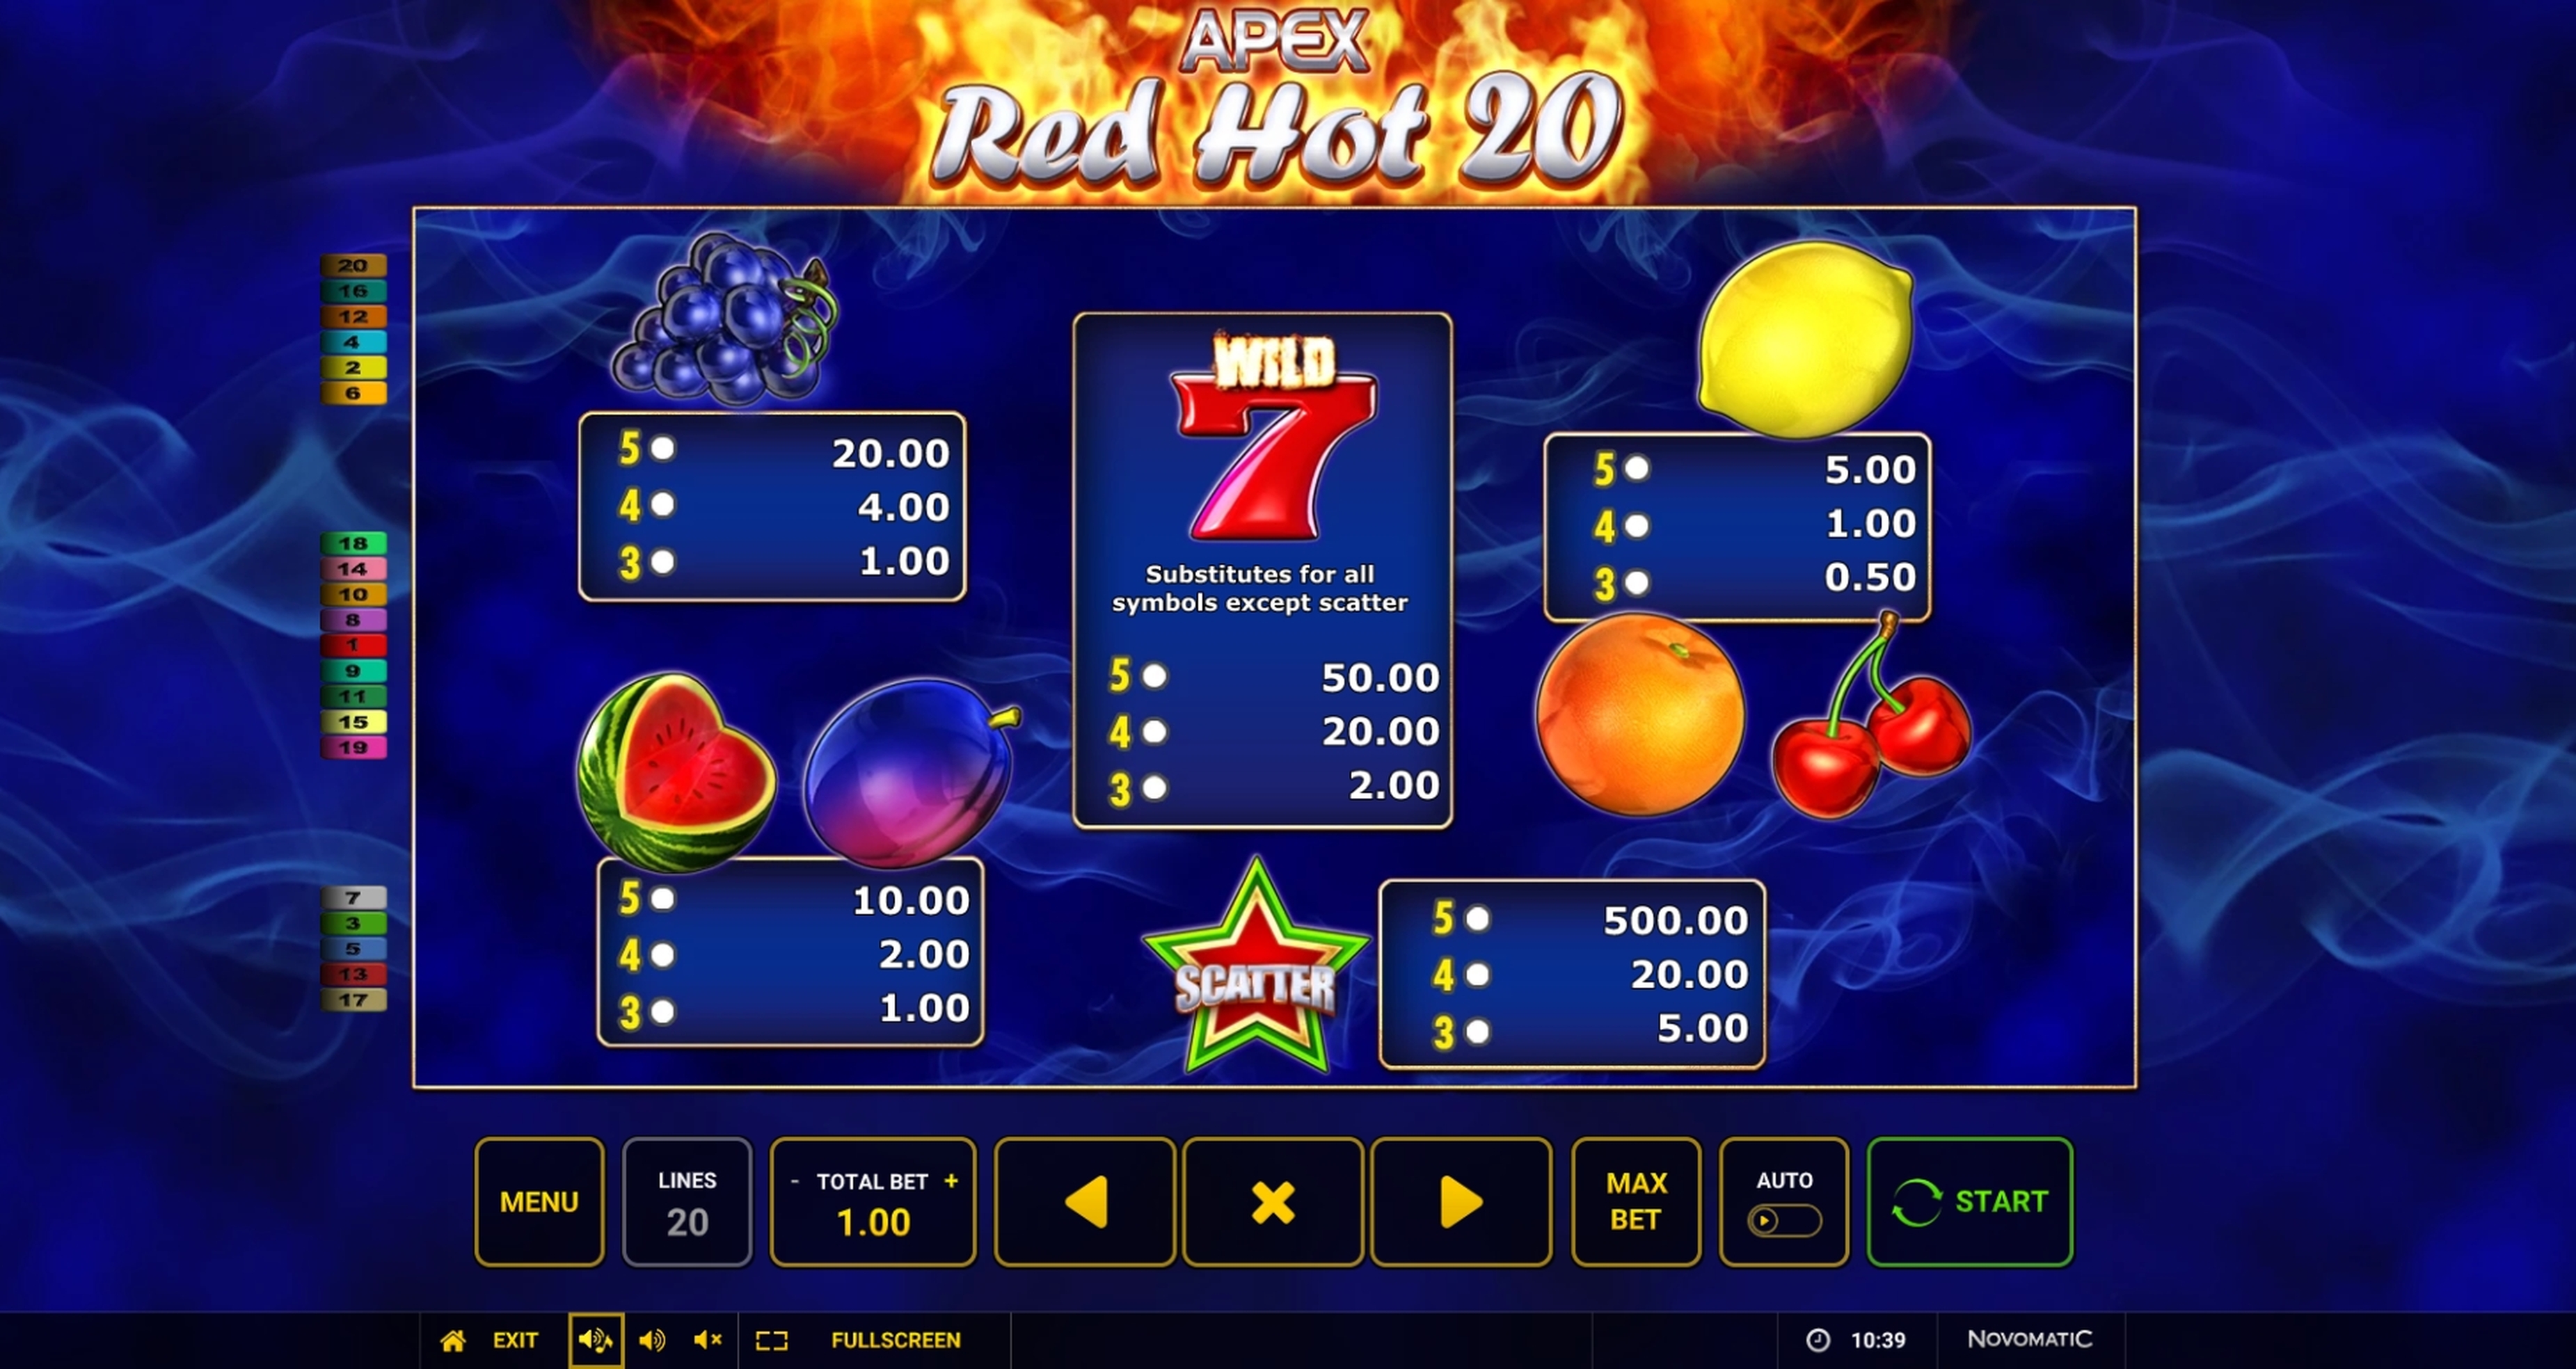 Info of Red Hot 20 Slot Game by Apex Gaming